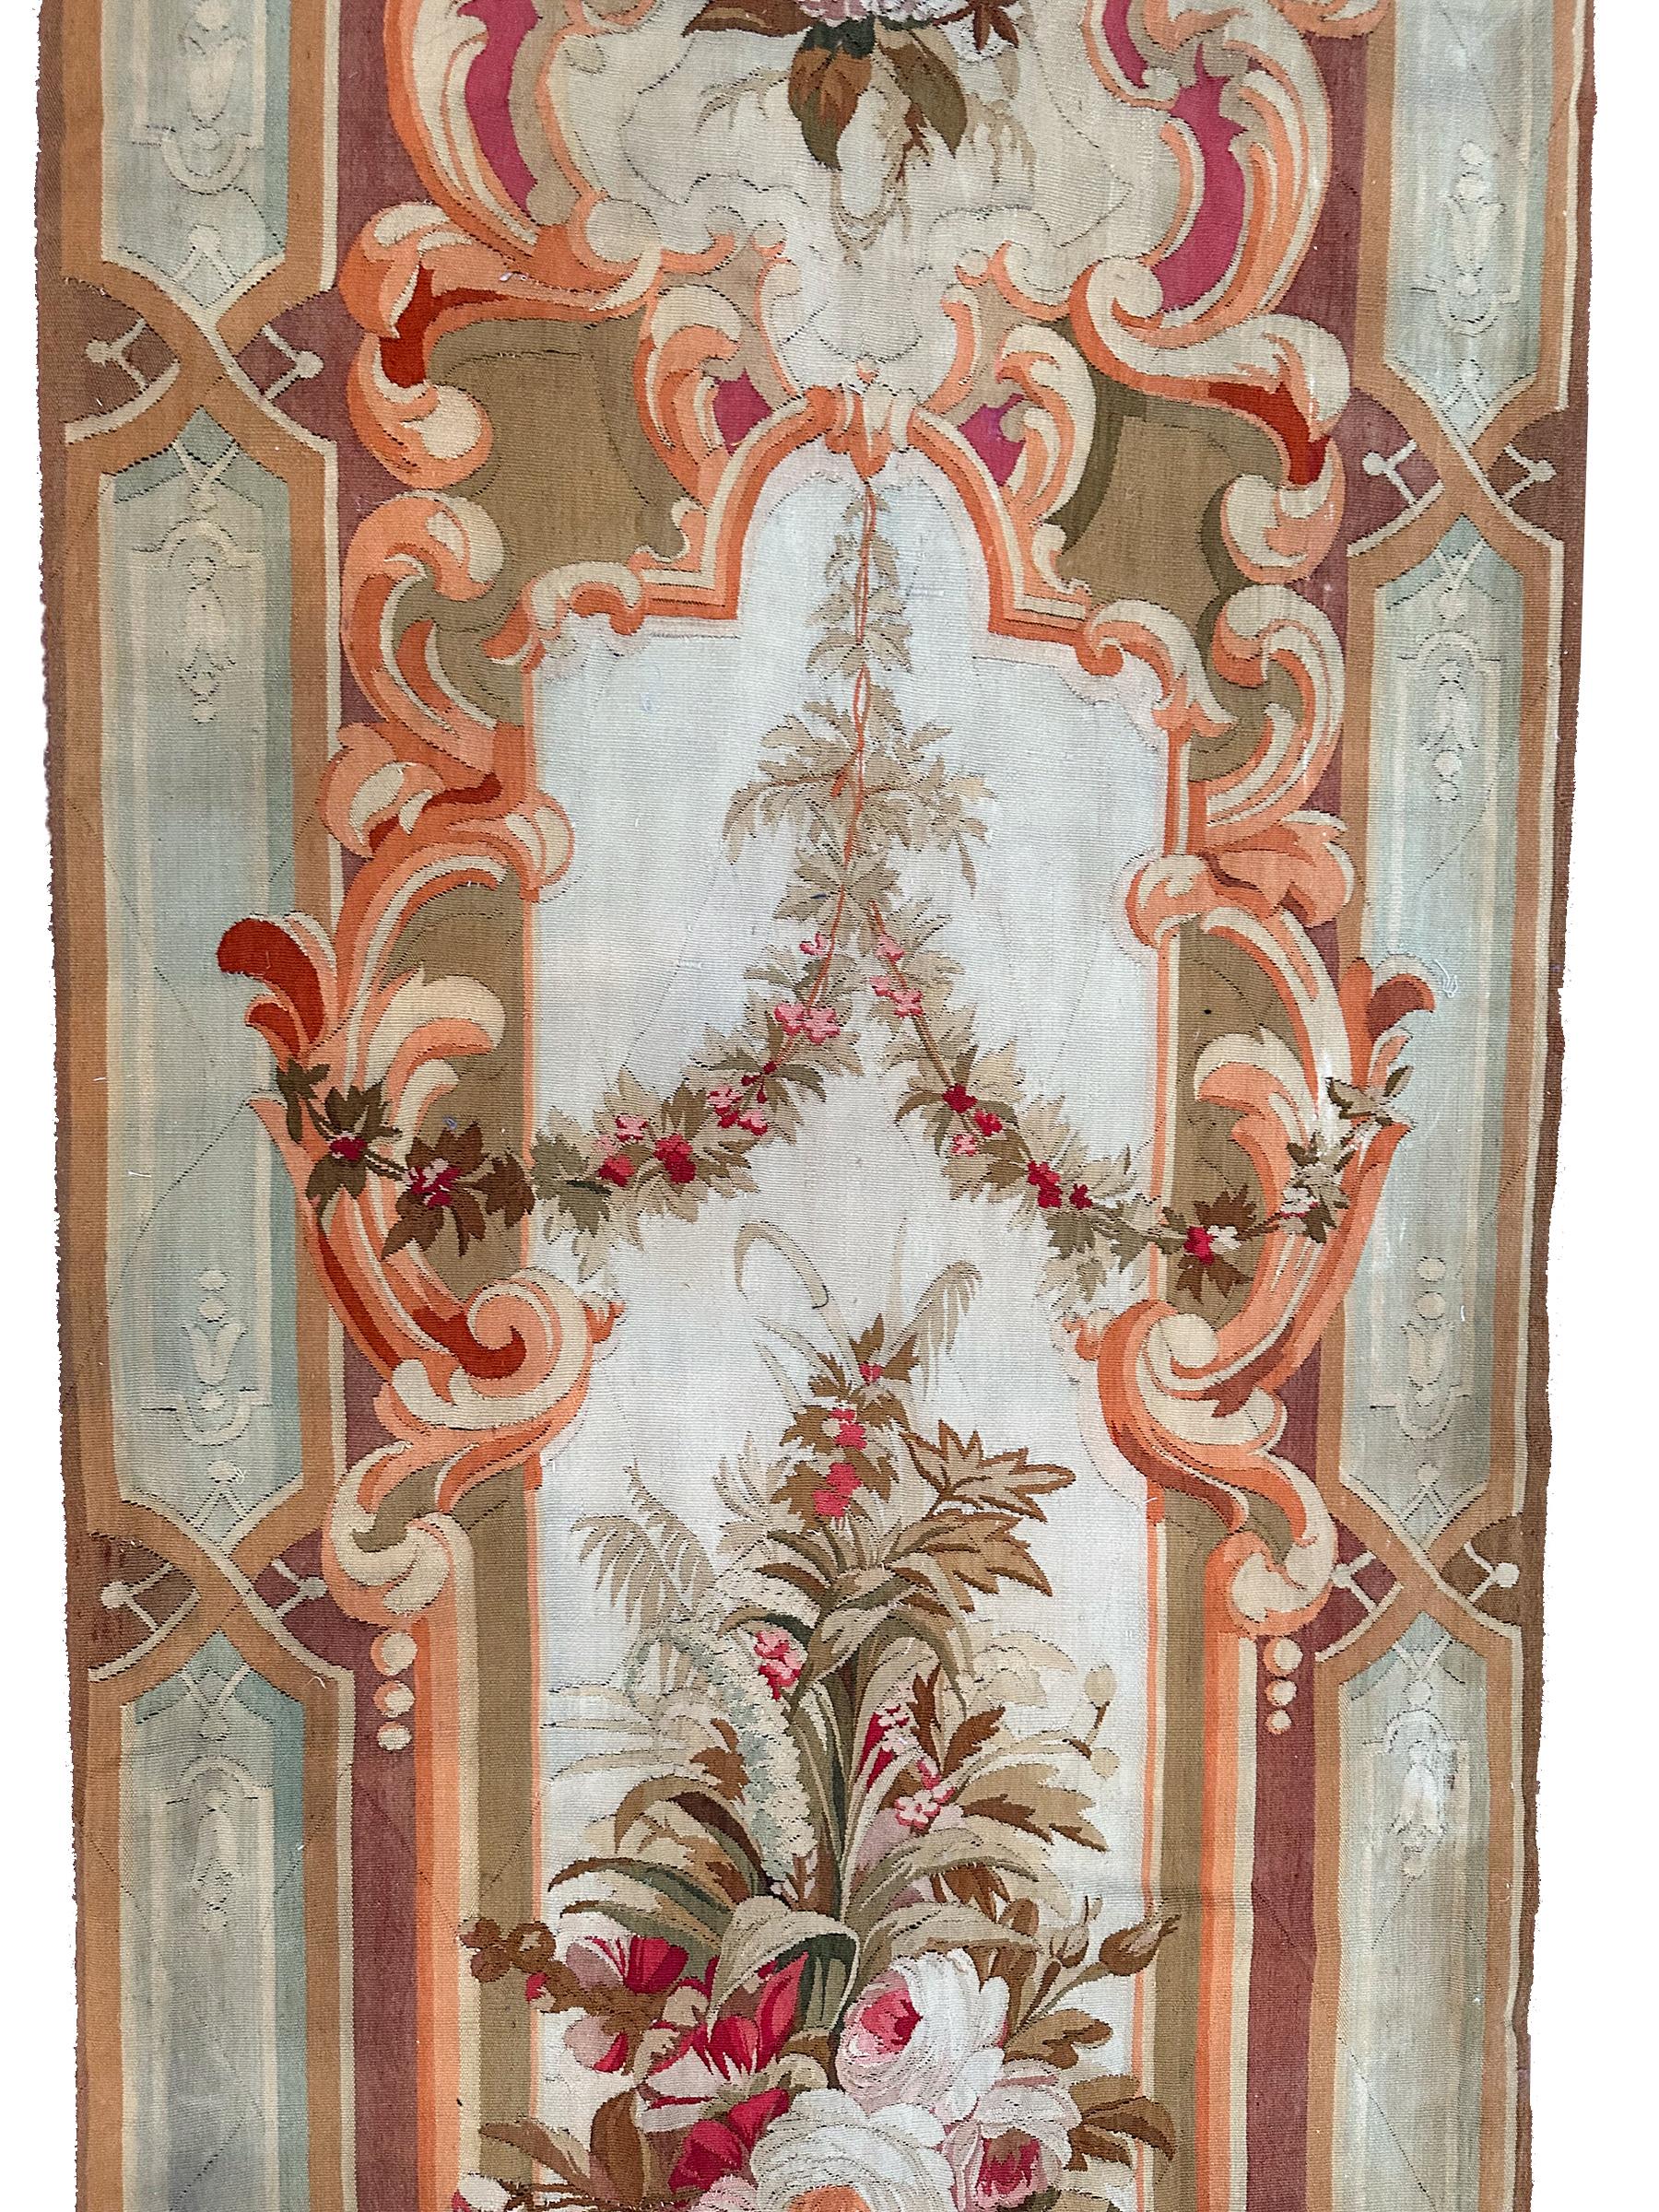 1920 Antique French Aubusson Tapestry Rug Floral Vase Runner 3x10 1880 97x287cm For Sale 3